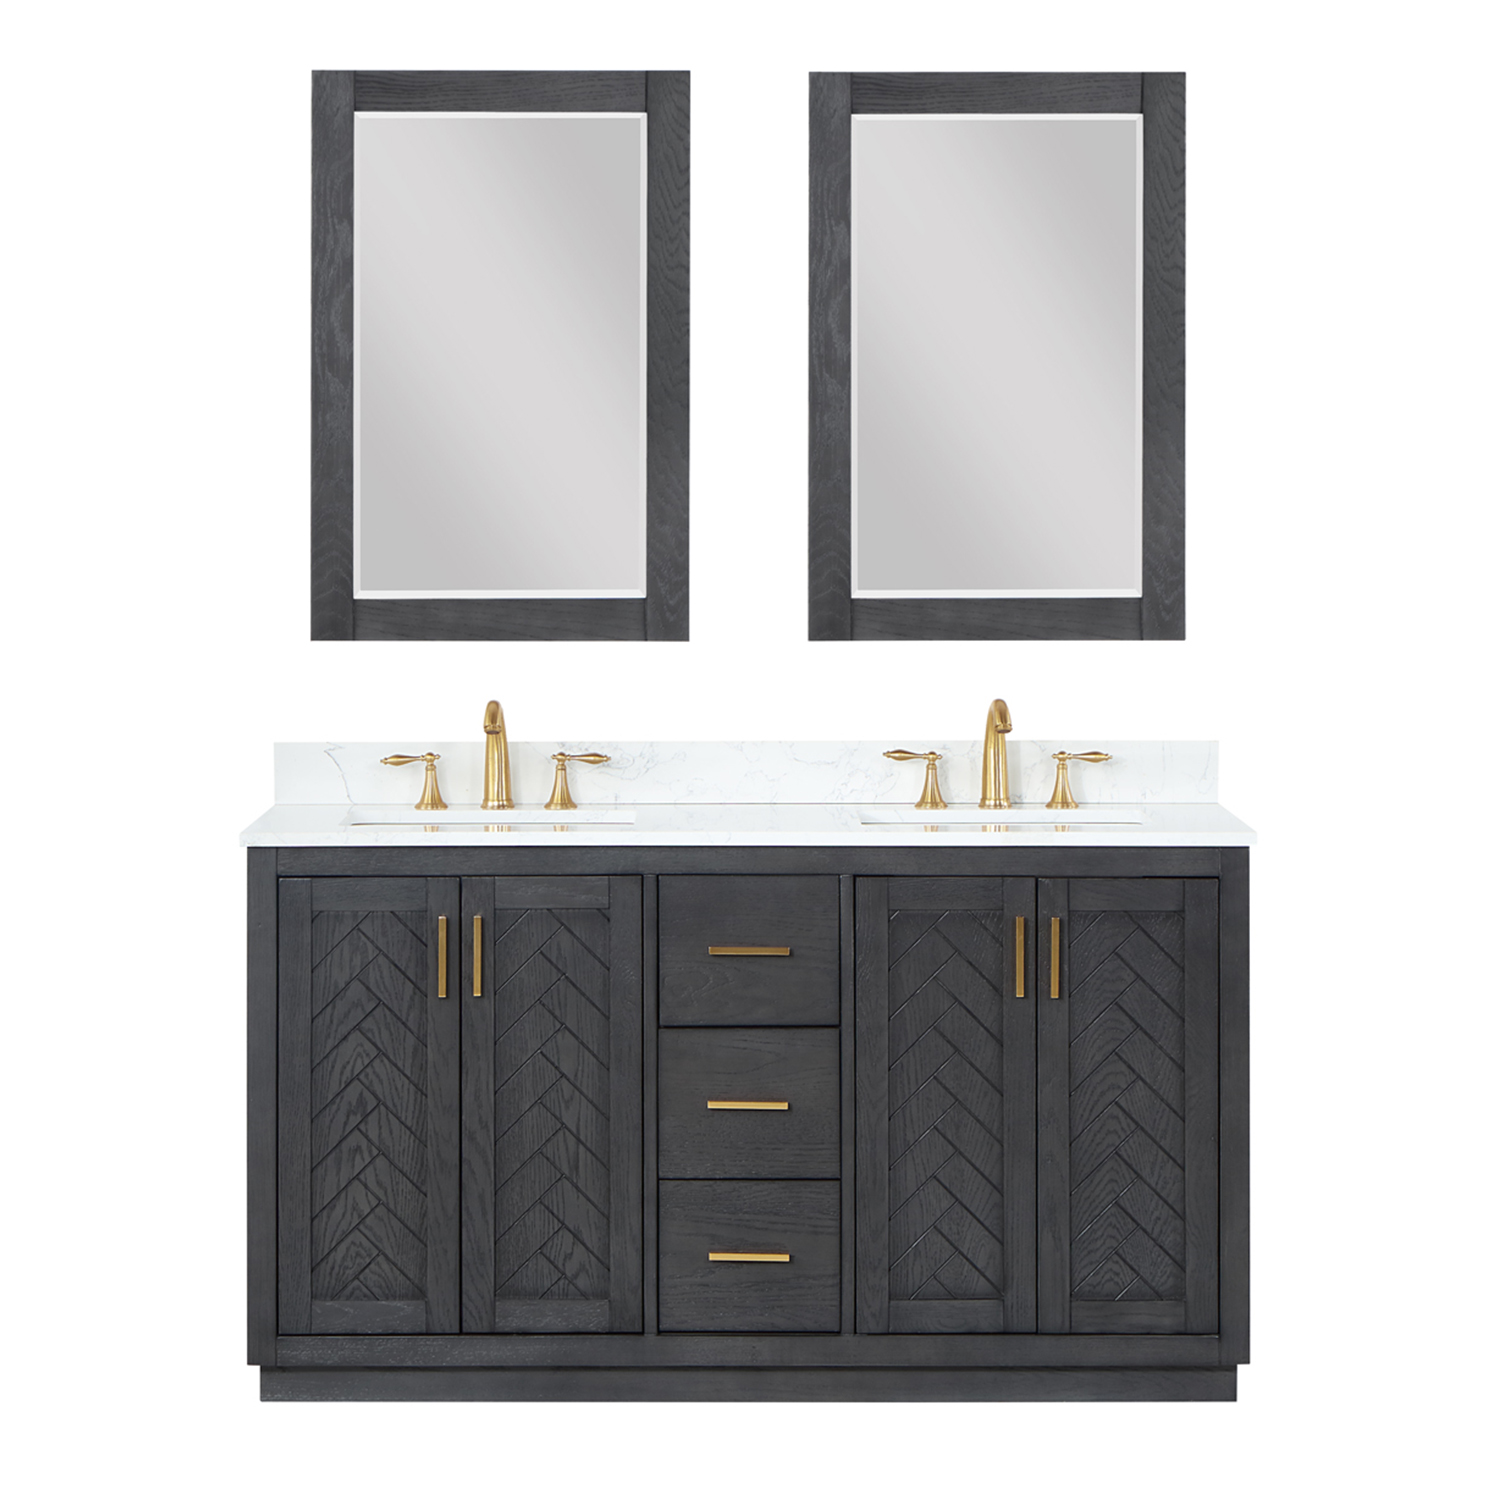 Issac Edwards Collection 72" Double Bathroom Vanity Set in Black Oak with Grain White Composite Stone Countertop without Mirror